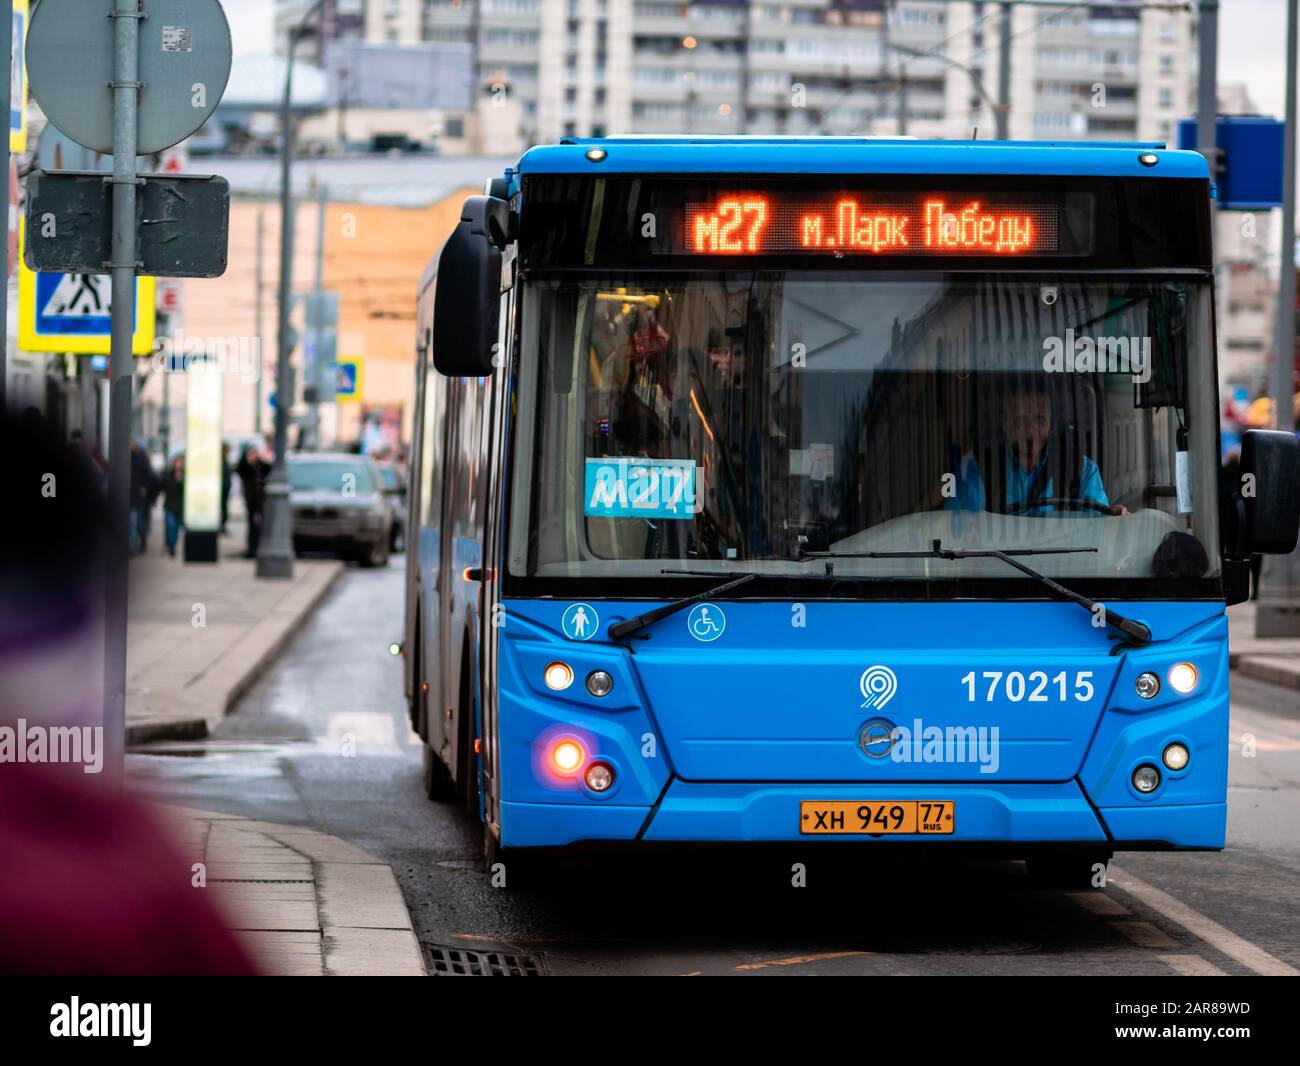 Moscow, Russia - January 17, 2020: The blue M27 bus pulls up to a public  transport stop. City street with buses. On the LED display of the machine  inf Stock Photo - Alamy